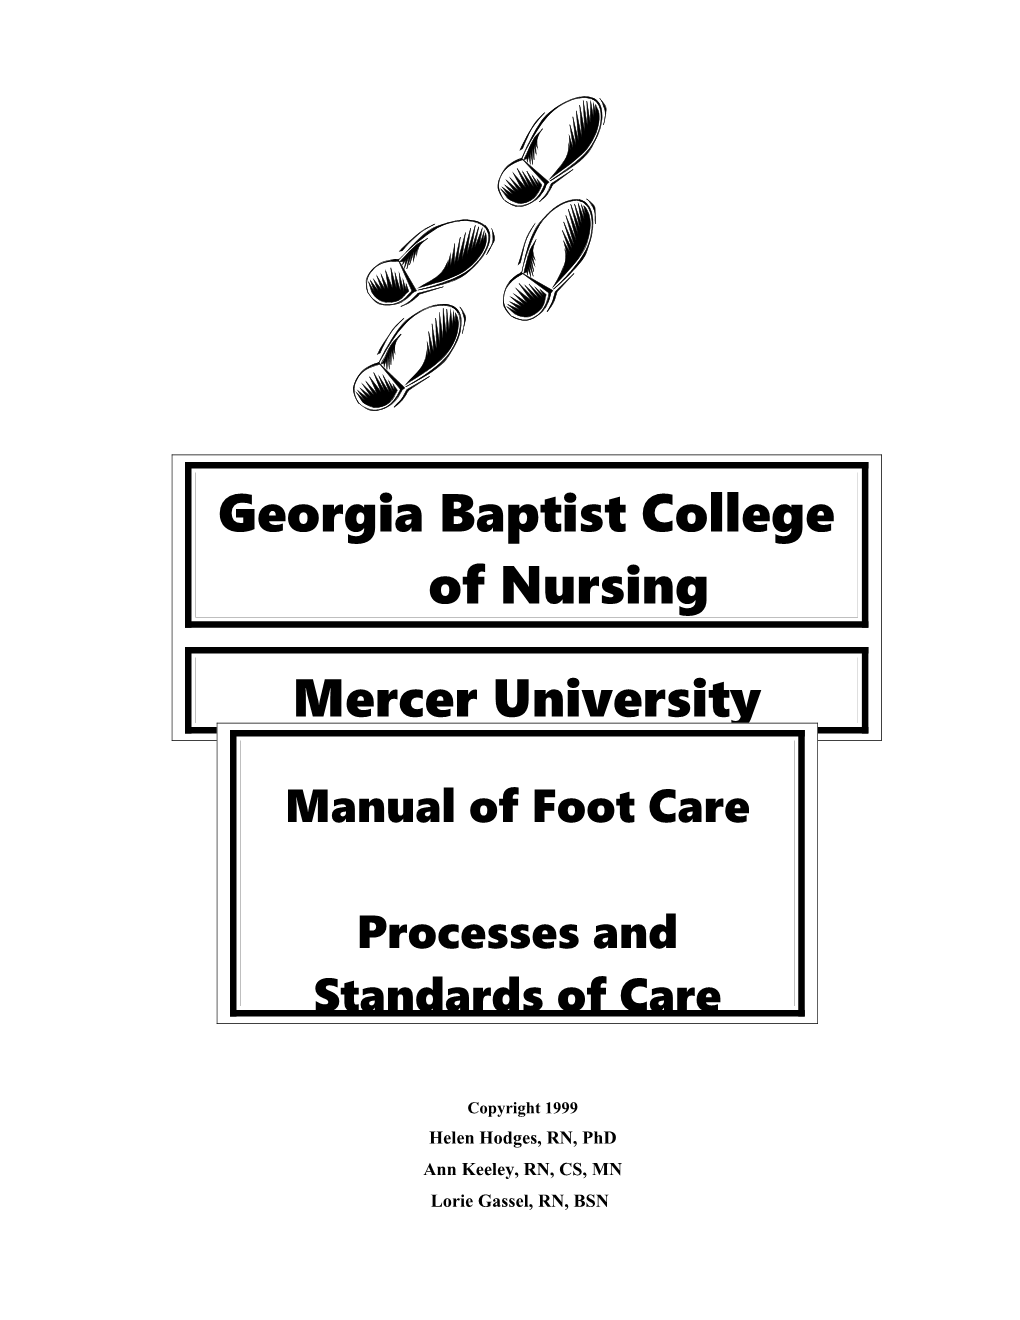 Definition of Foot Care: the Basic Care of the Lower Leg, Foot, and Nails, Including Mobility